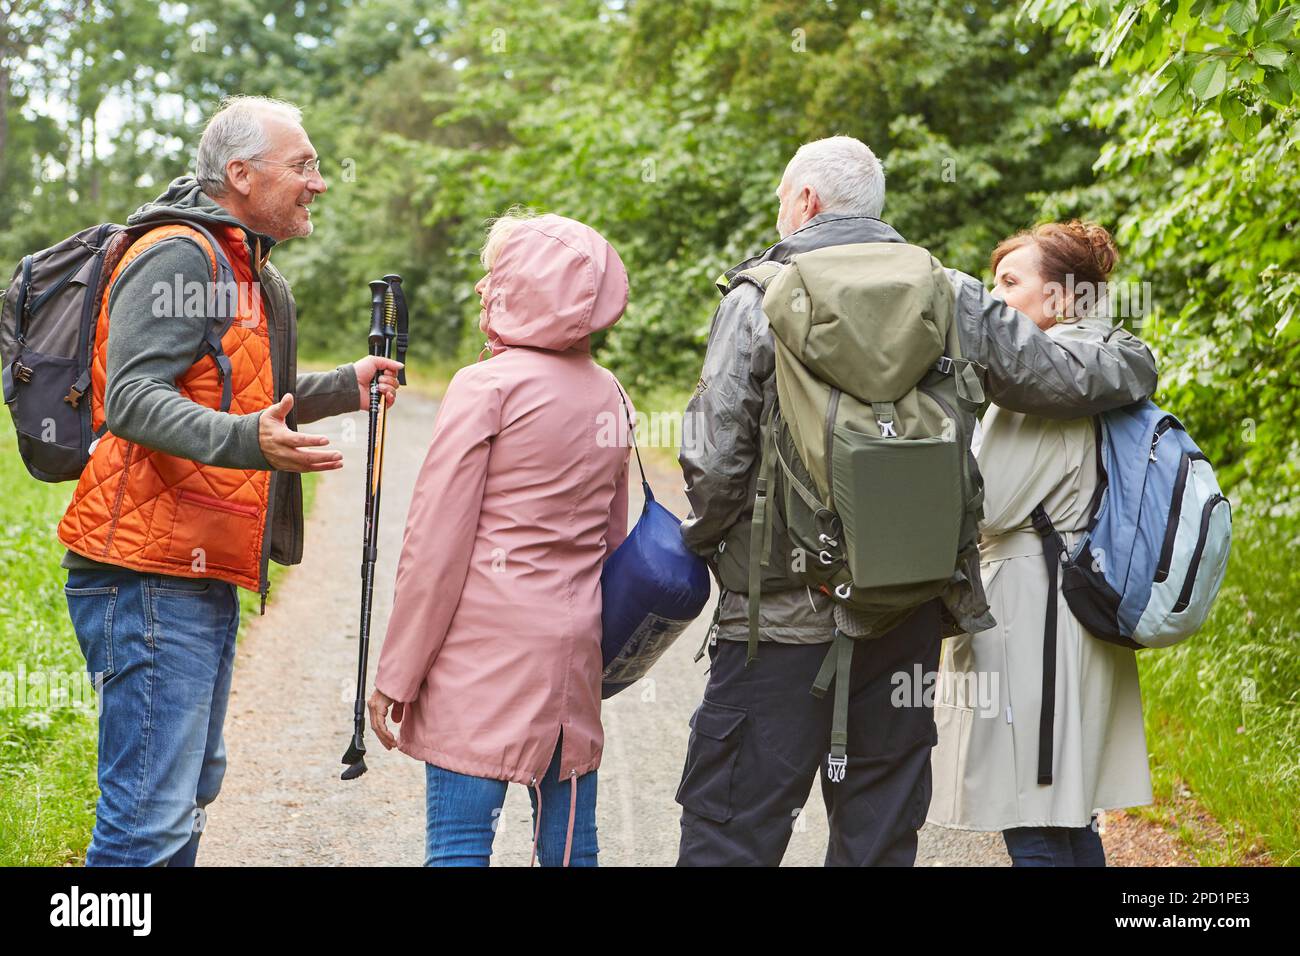 Rear view of senior men and women walking talking while hiking in forest during vacation Stock Photo